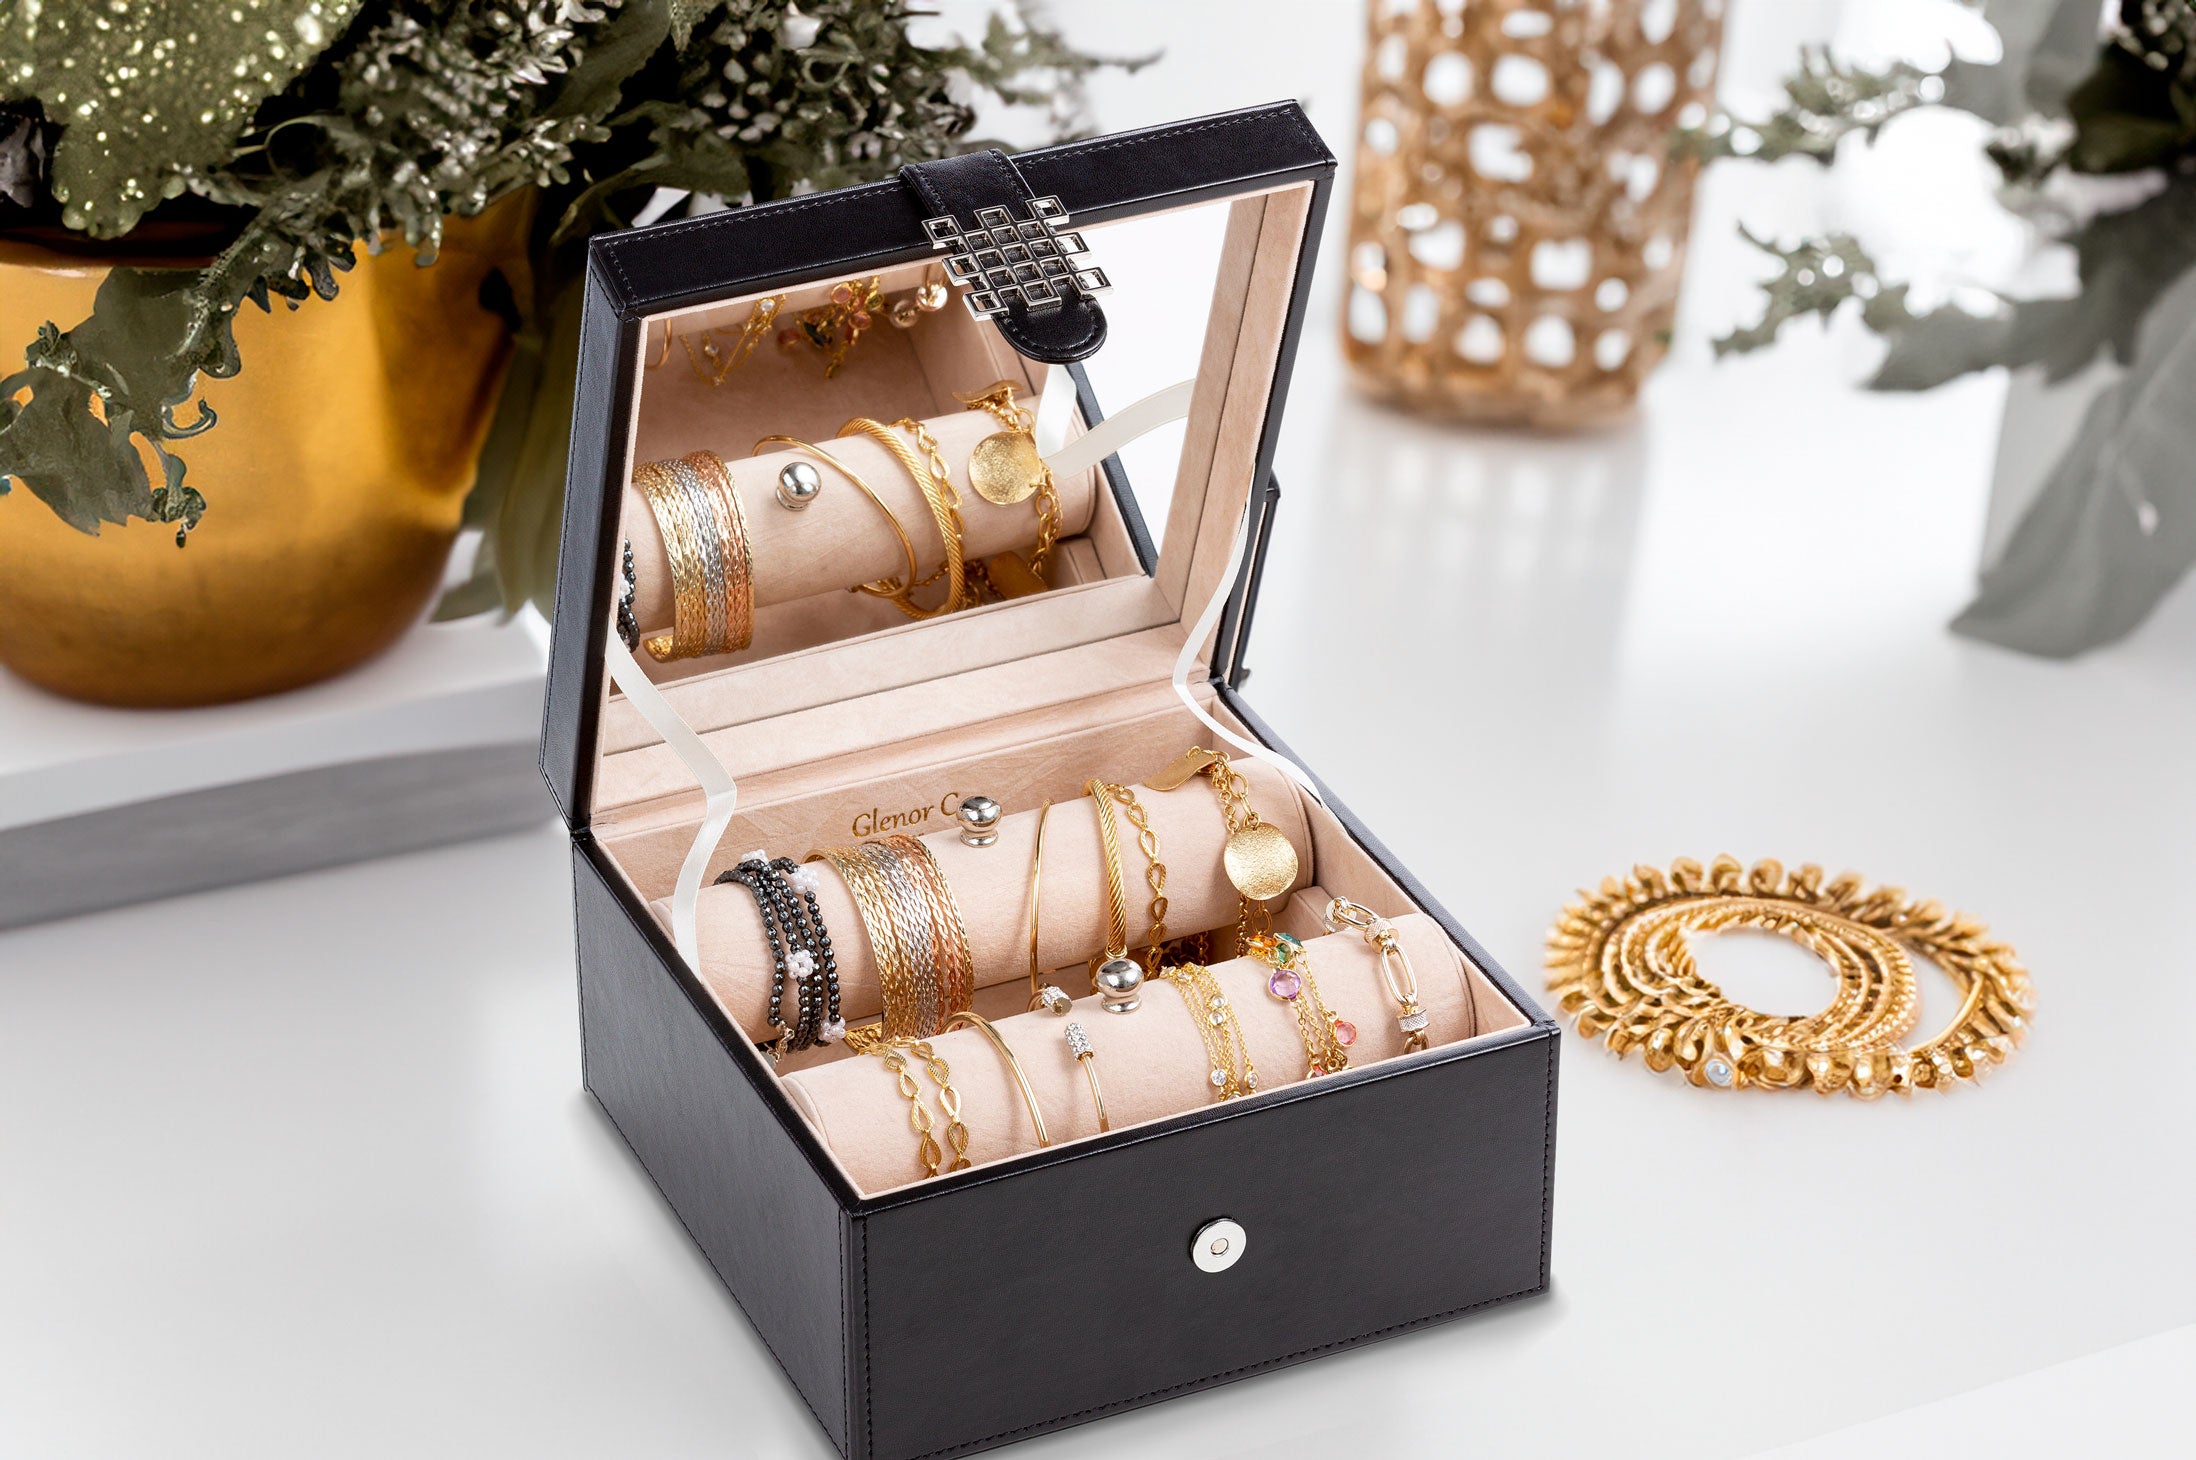 Bracelet Jewelry Box with 2 Removable Rolls - Holder stores Bracelets,  Bangles & Watches - Organizer w Metal Closure - Large Mirror - PU Leather 